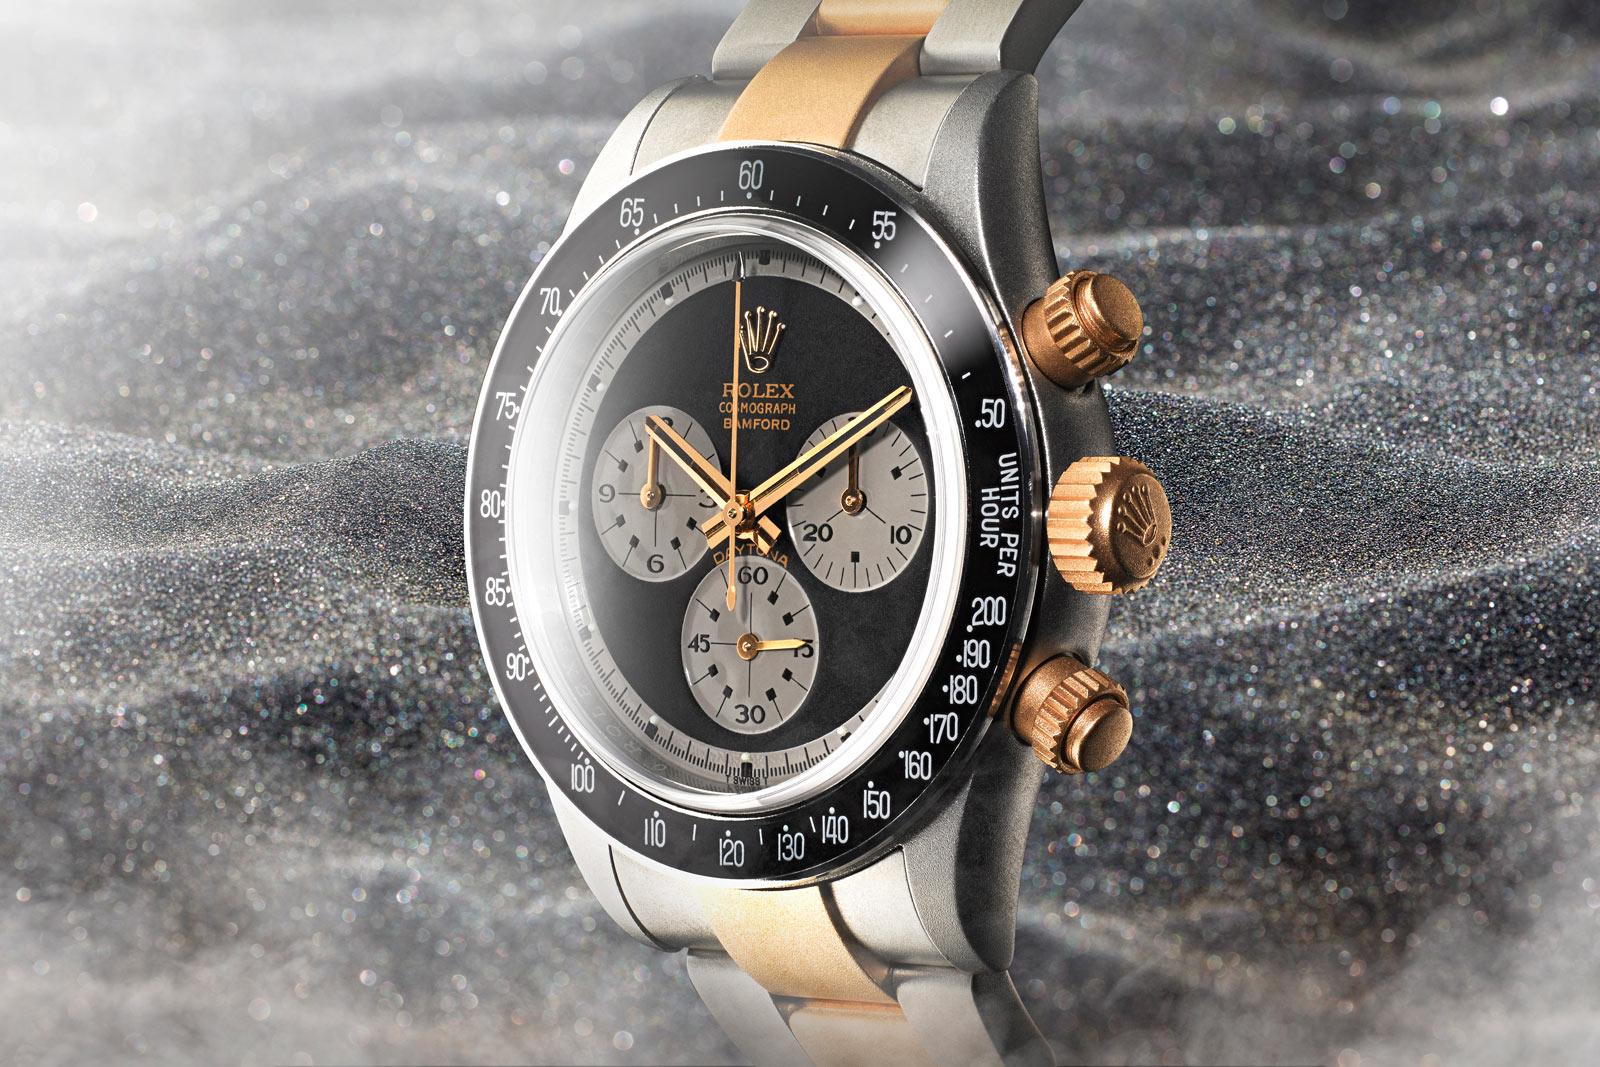 Bamford Watch Department's Heritage Series pays homage to the Rolex Daytona